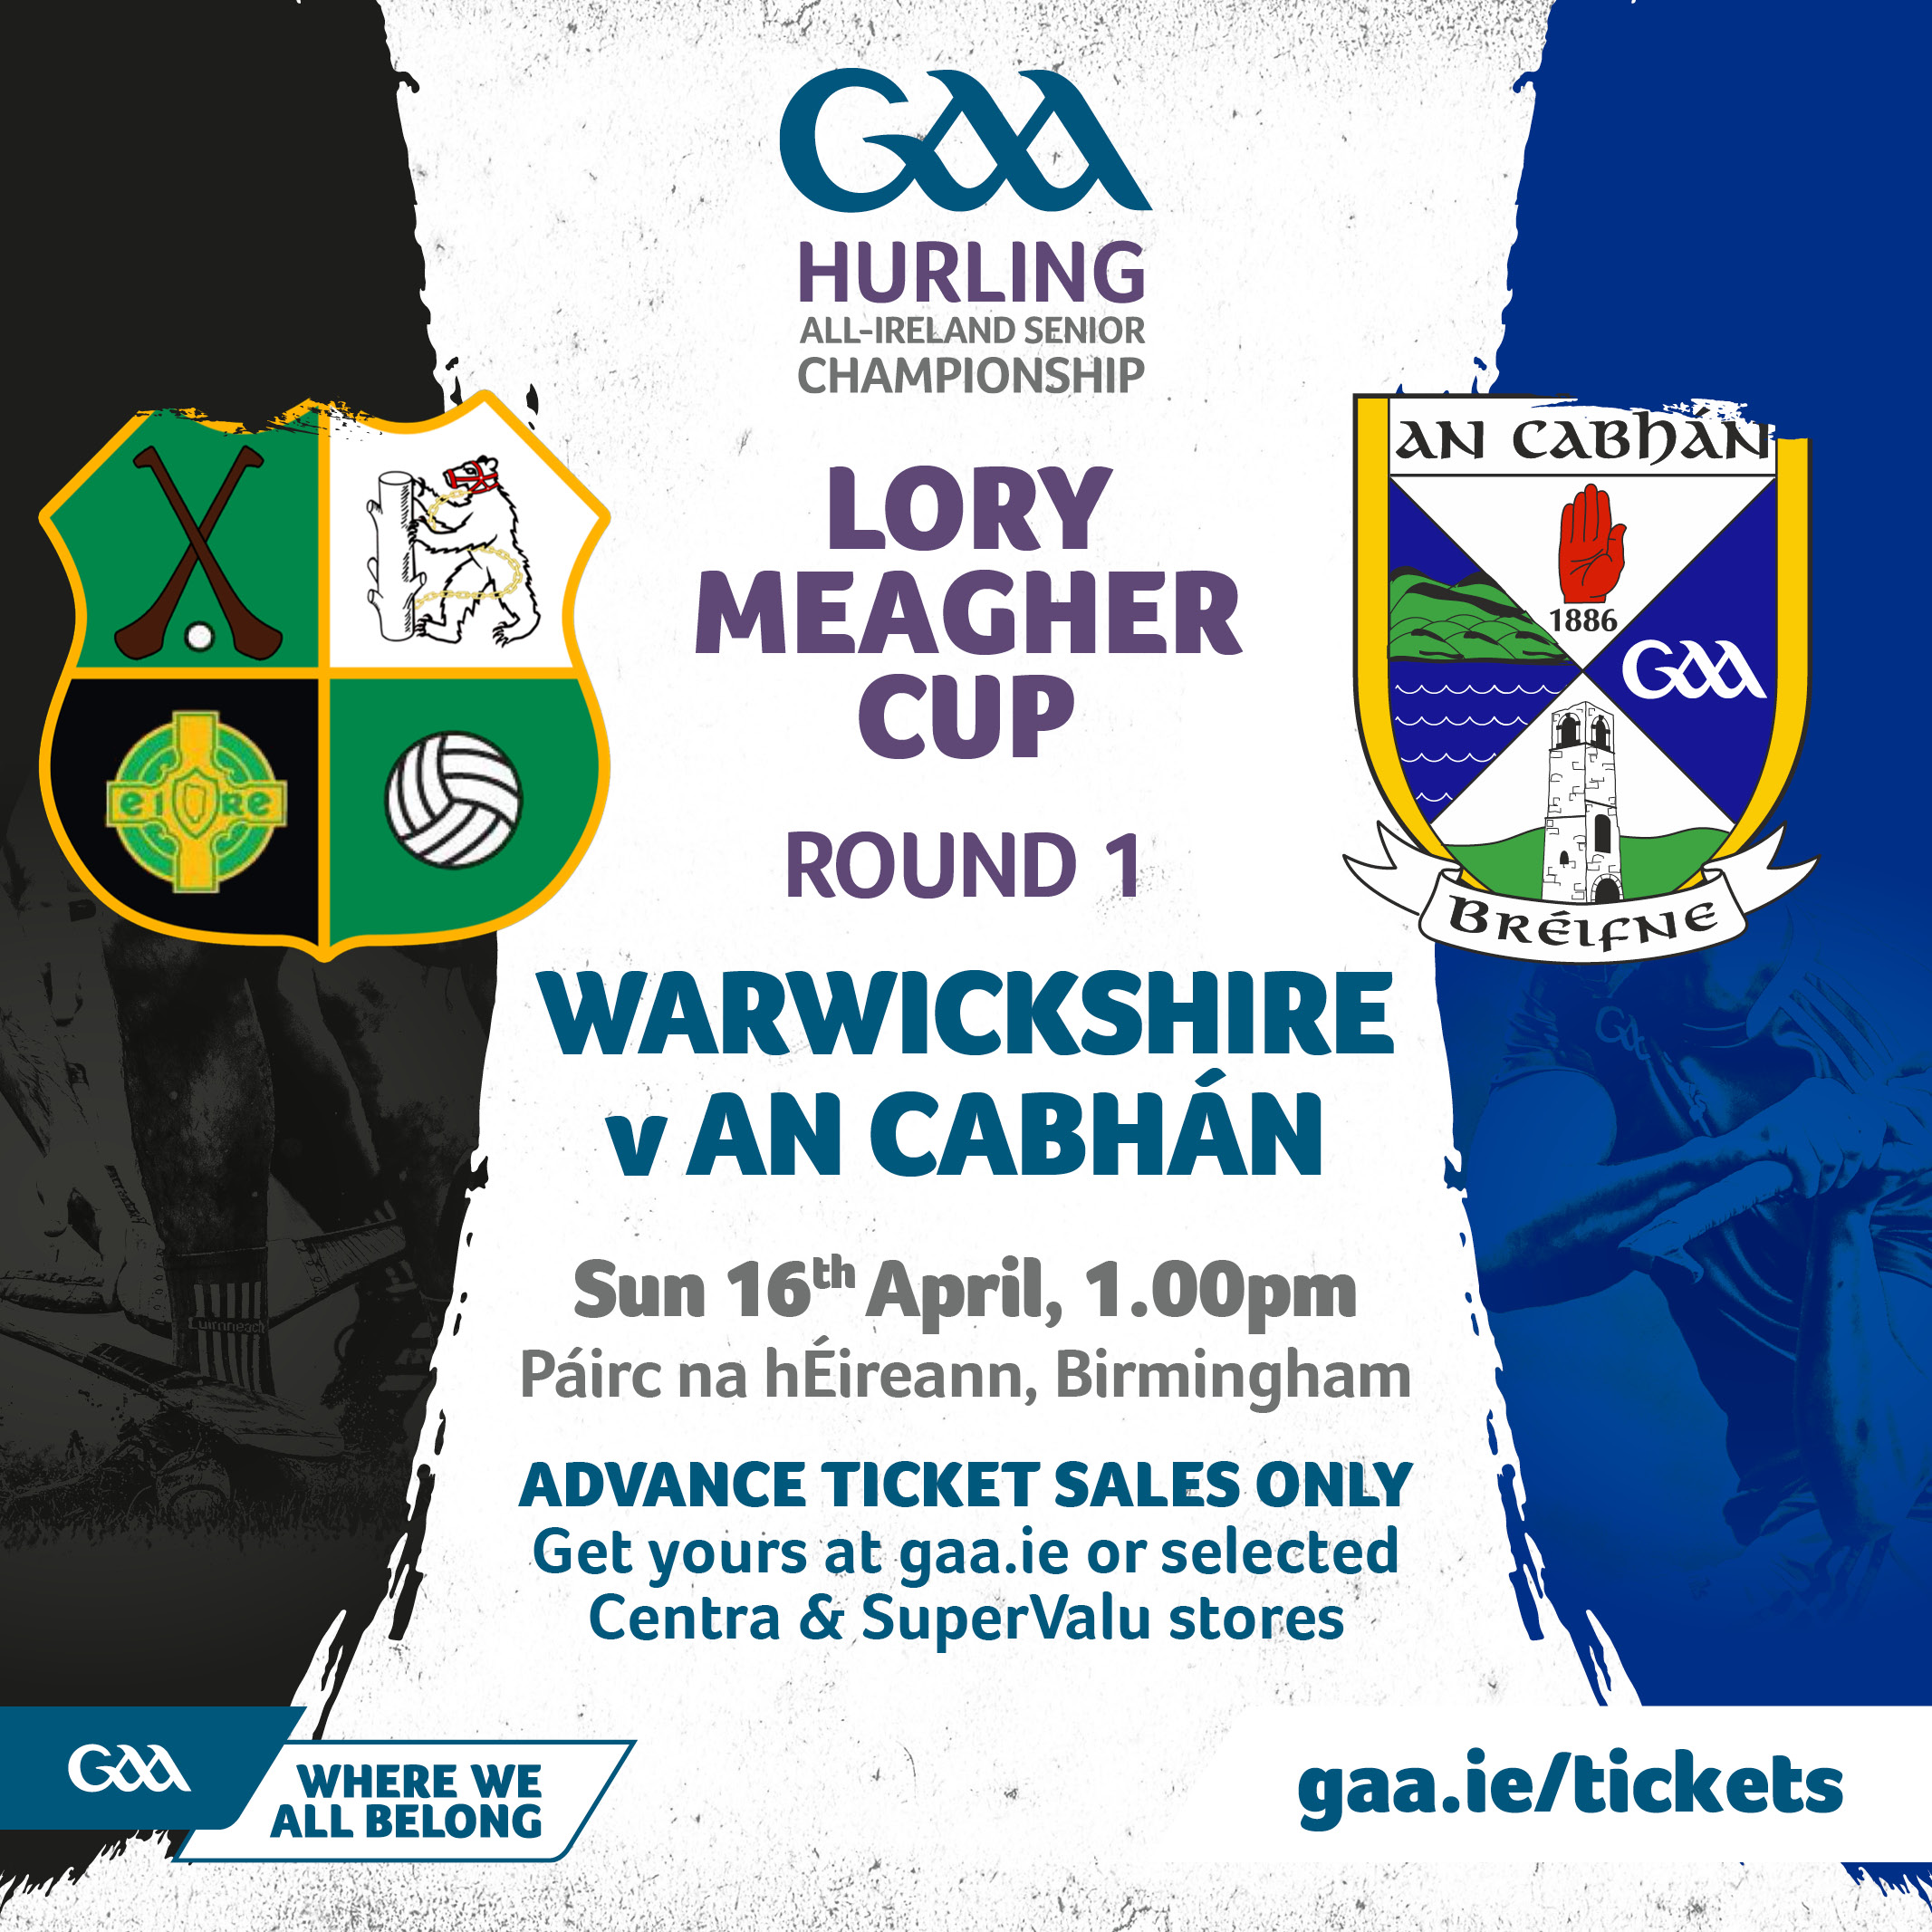 Lory Meagher Cup, Round 1: Warwickshire vs Cavan – Matchday Info